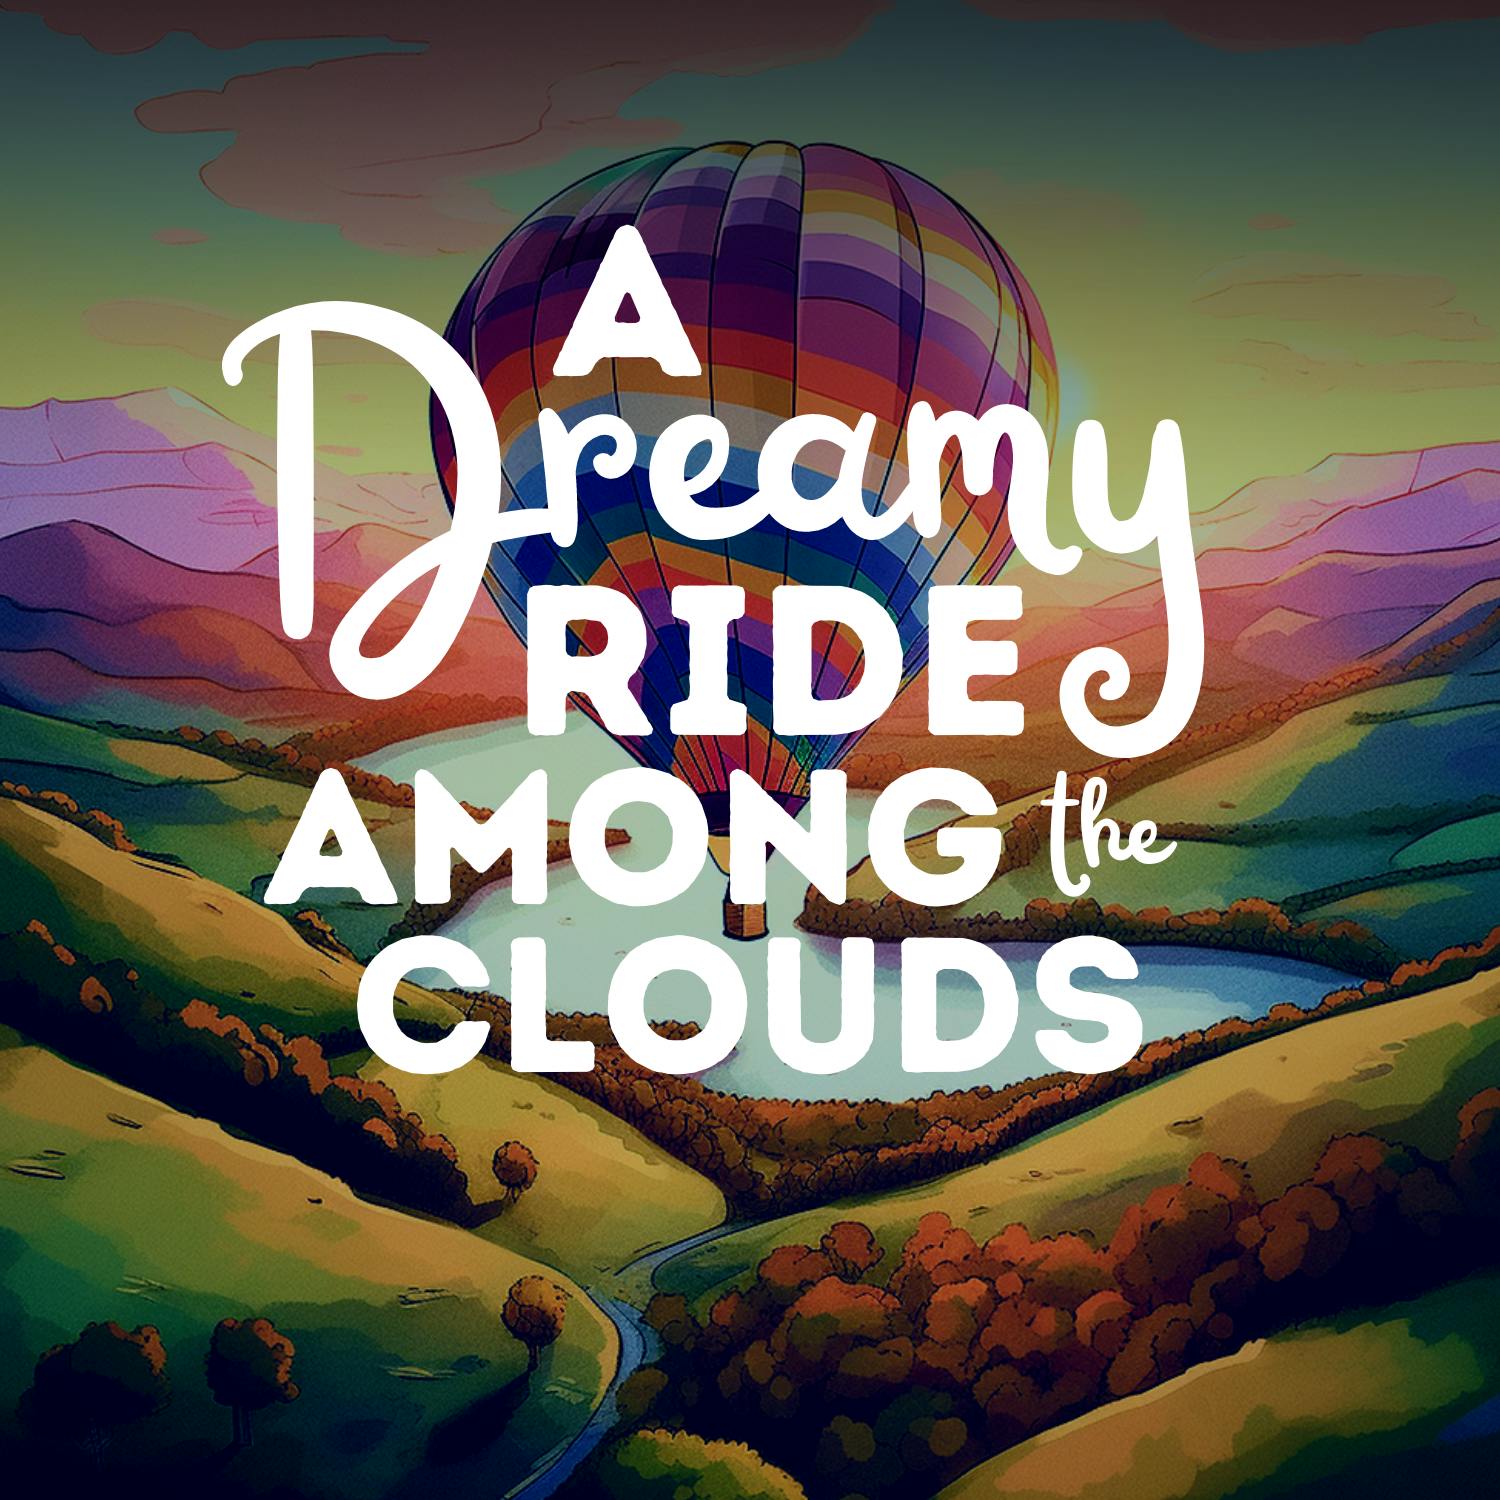 A Dreamy Ride Among the Clouds